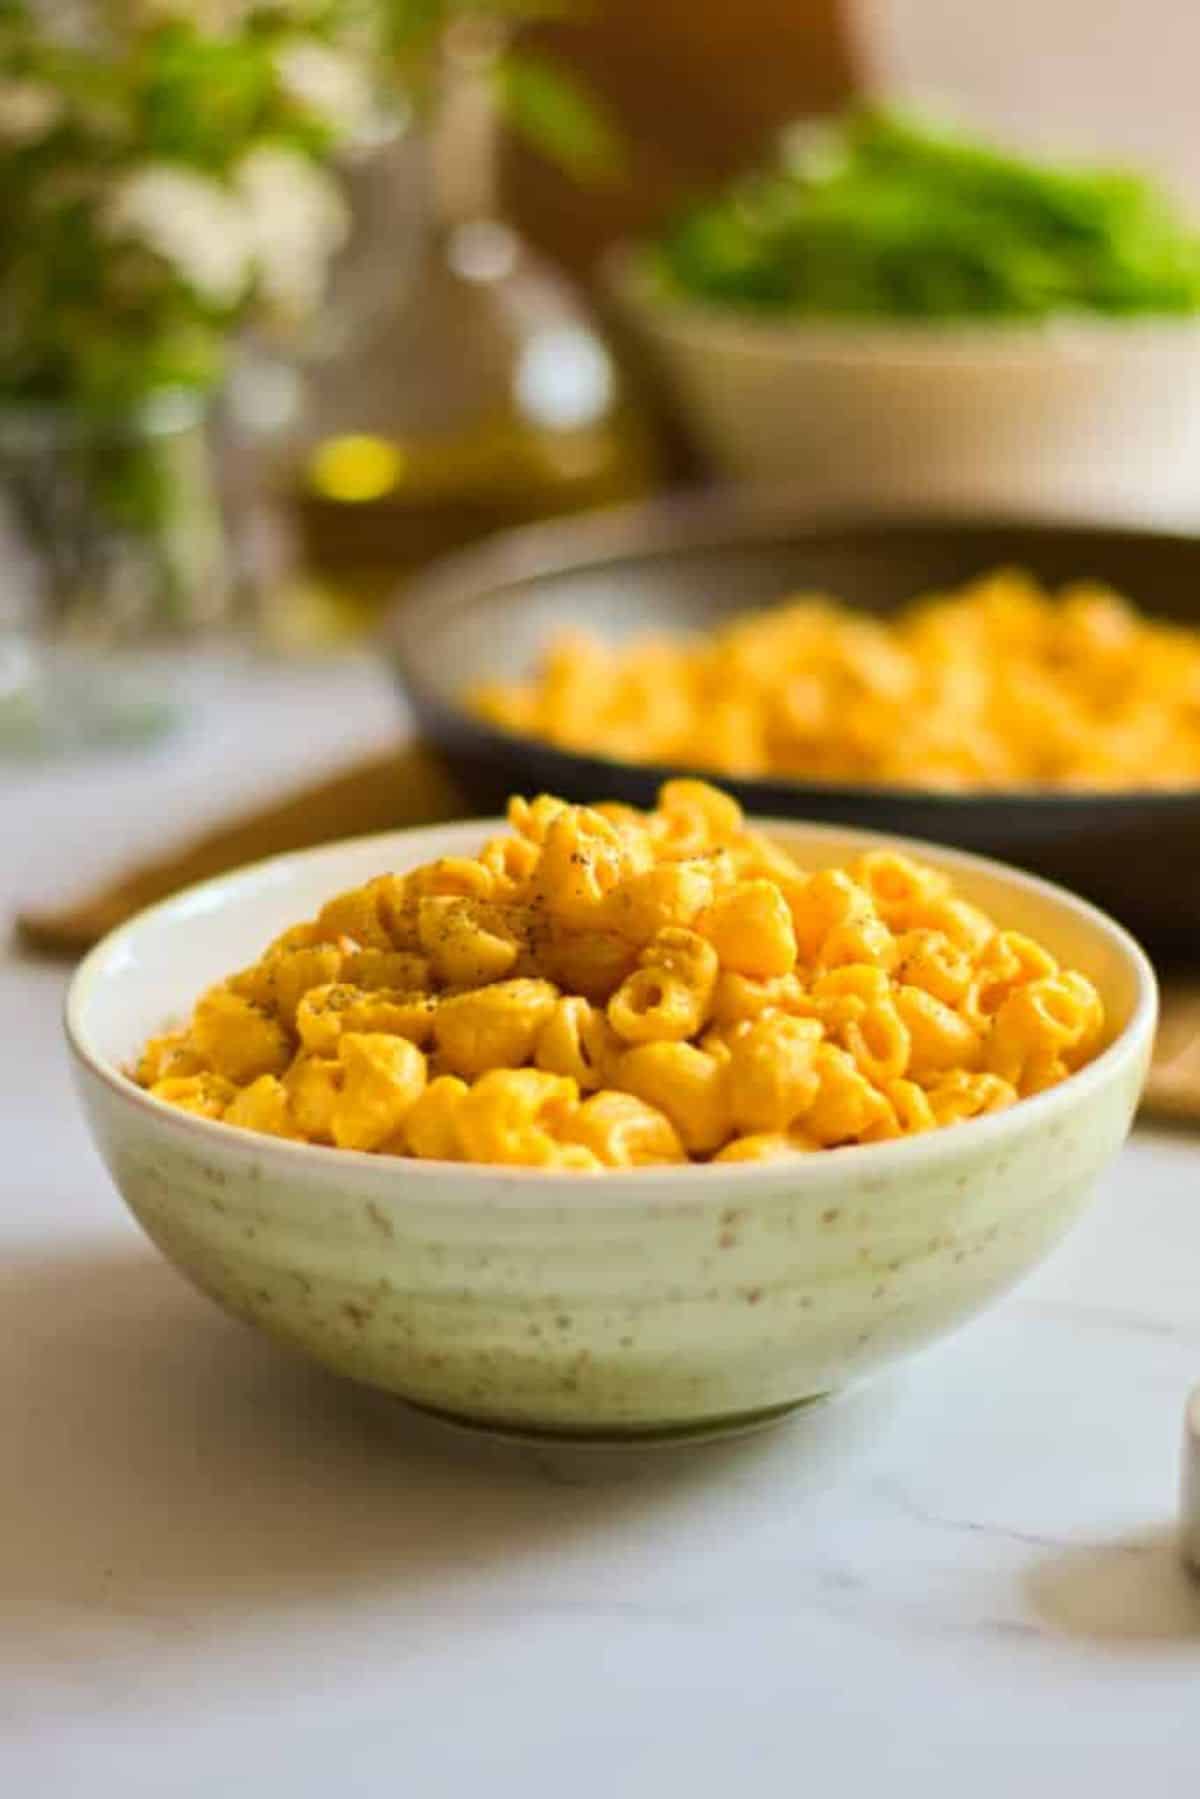 Flavorful Gluten-Free Vegan Mac and Cheese with Potatoes and Carrots in a bowl.